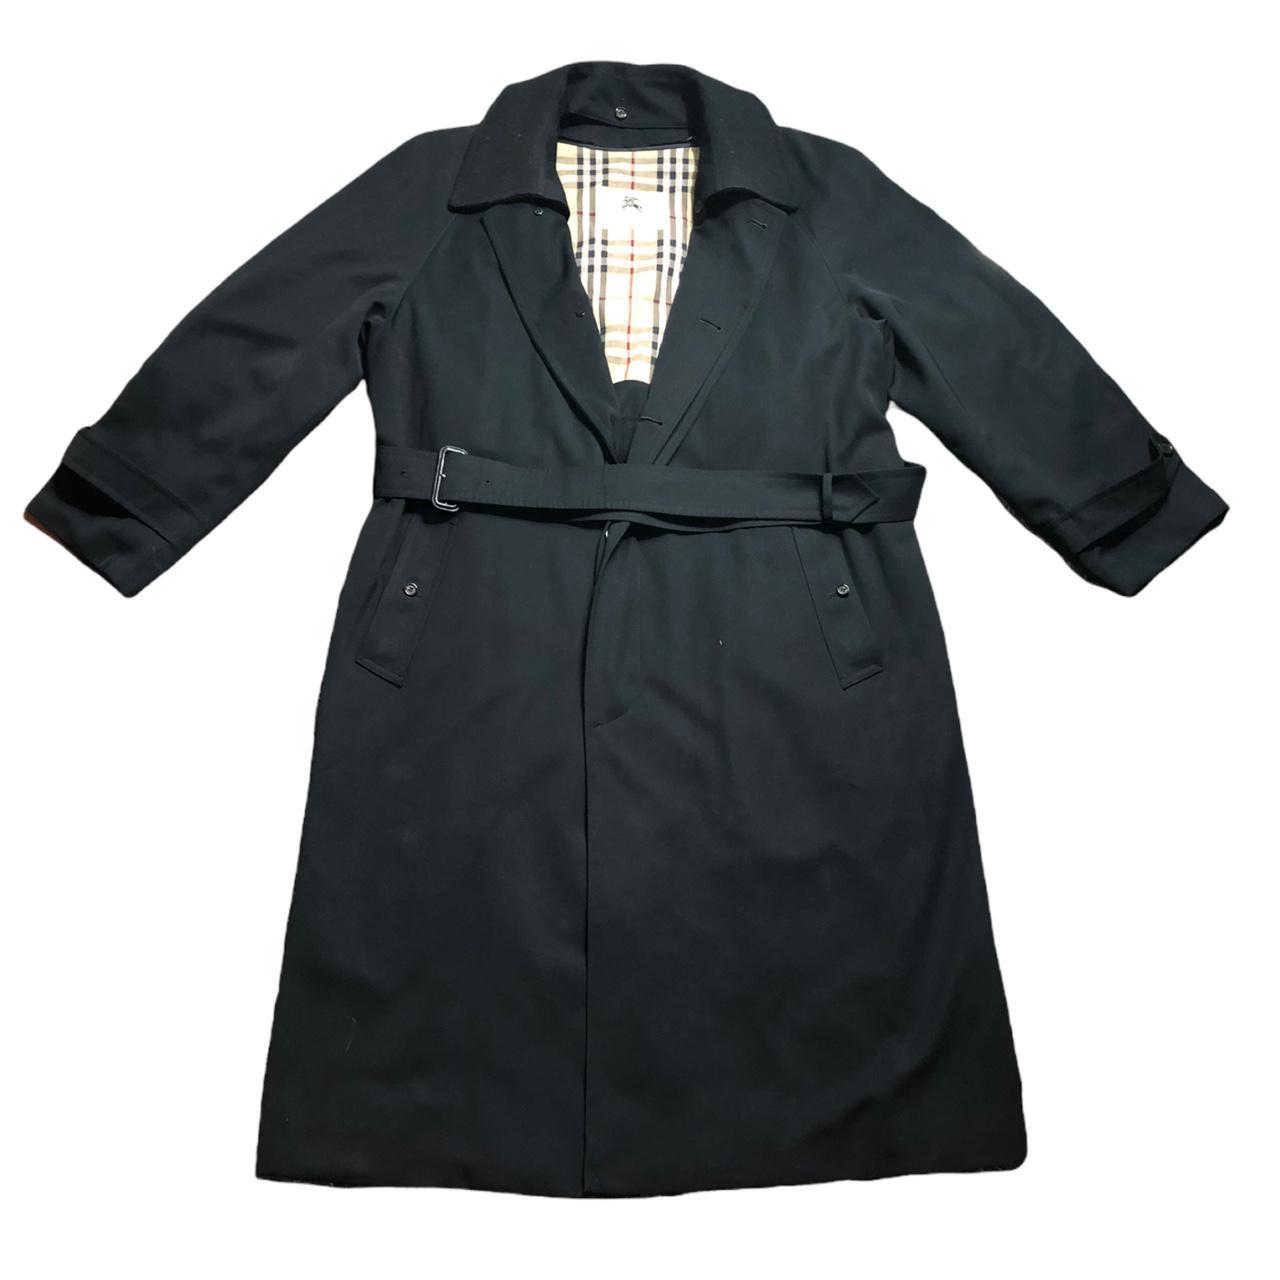 Product Image 1 - Burberry Lawrence Black Overcoat
Size: 44